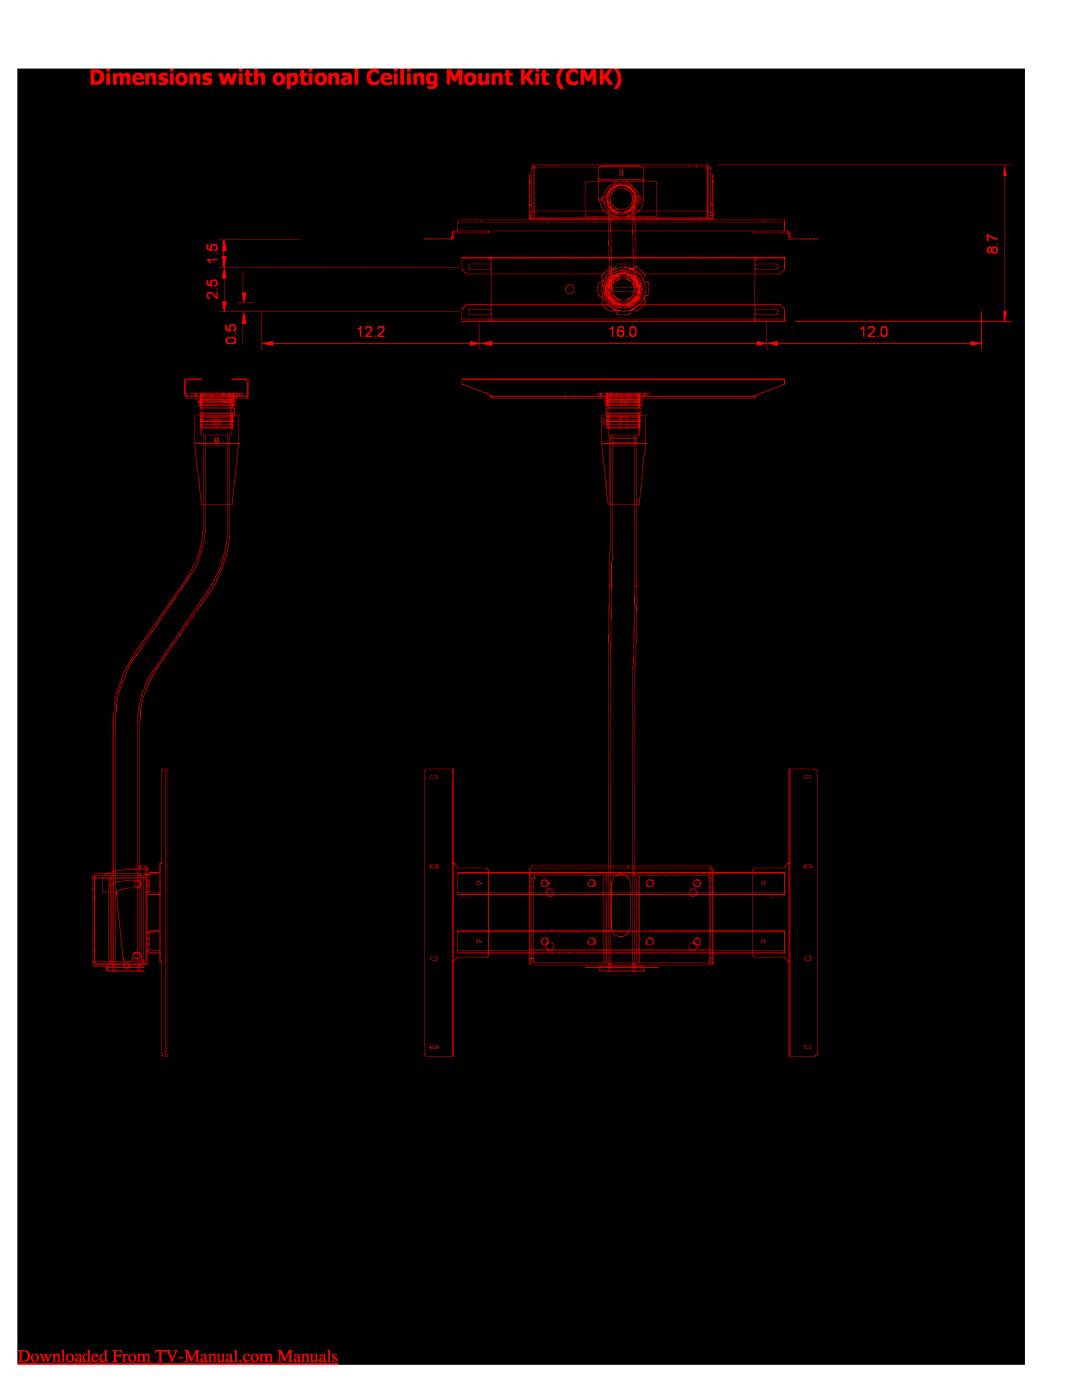 NEC Dimensions with optional Ceiling Mount Kit CMK, 42VP4/42VP4D, Downloaded From TV-Manual.comManuals, 2.5, 16.0 